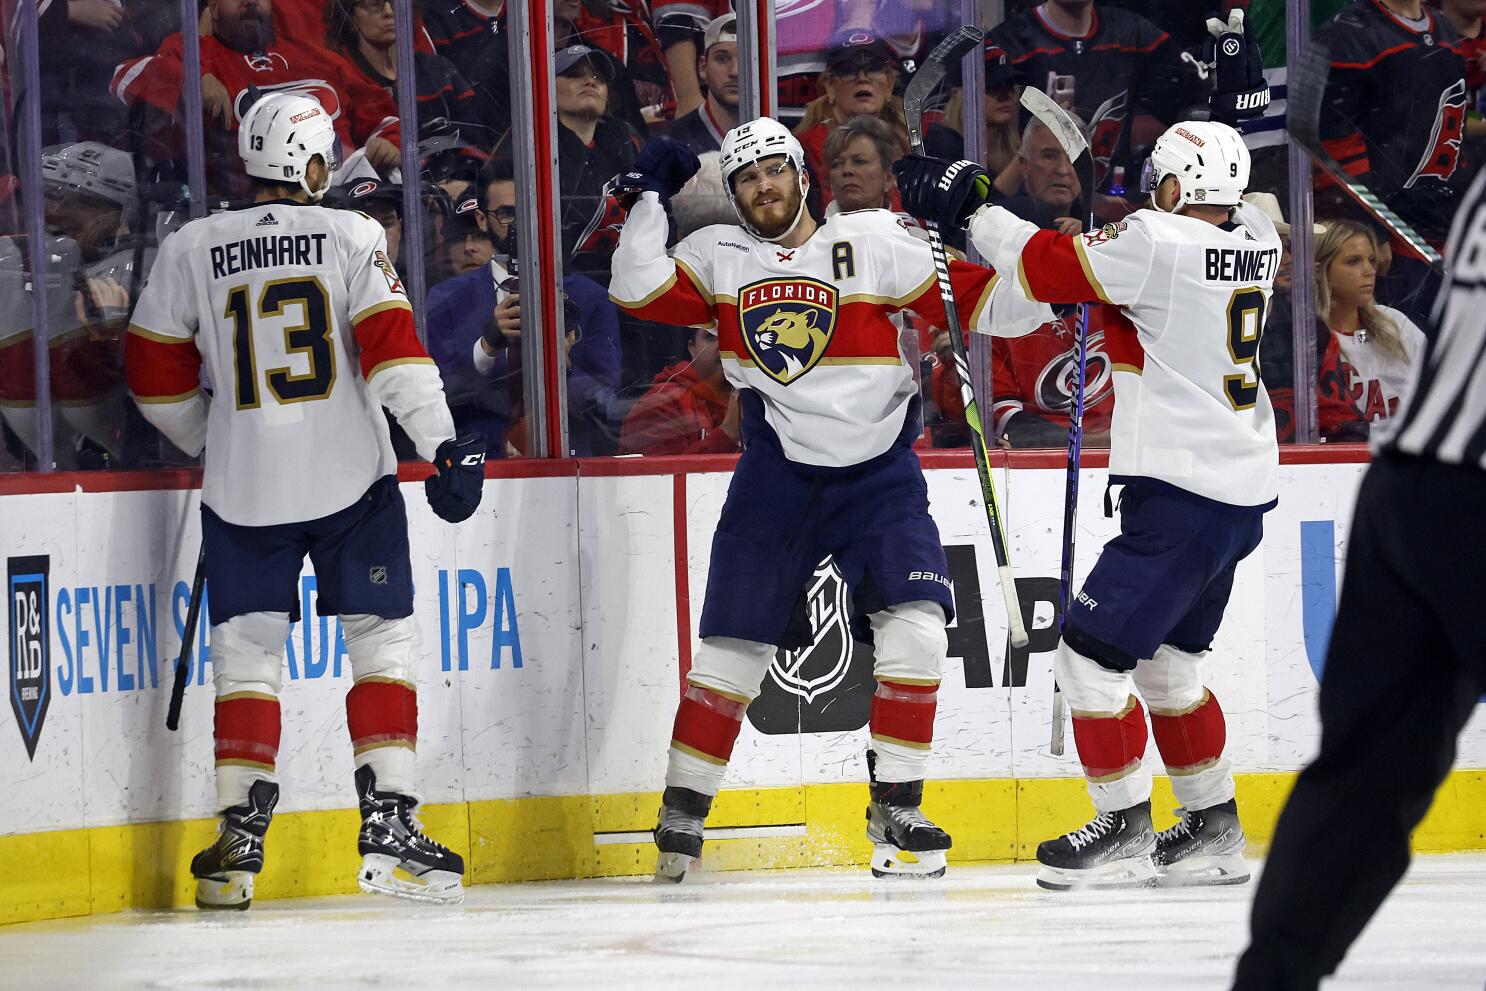 Tkachuk scores another OT winner, lifting Panthers to 2-0 series